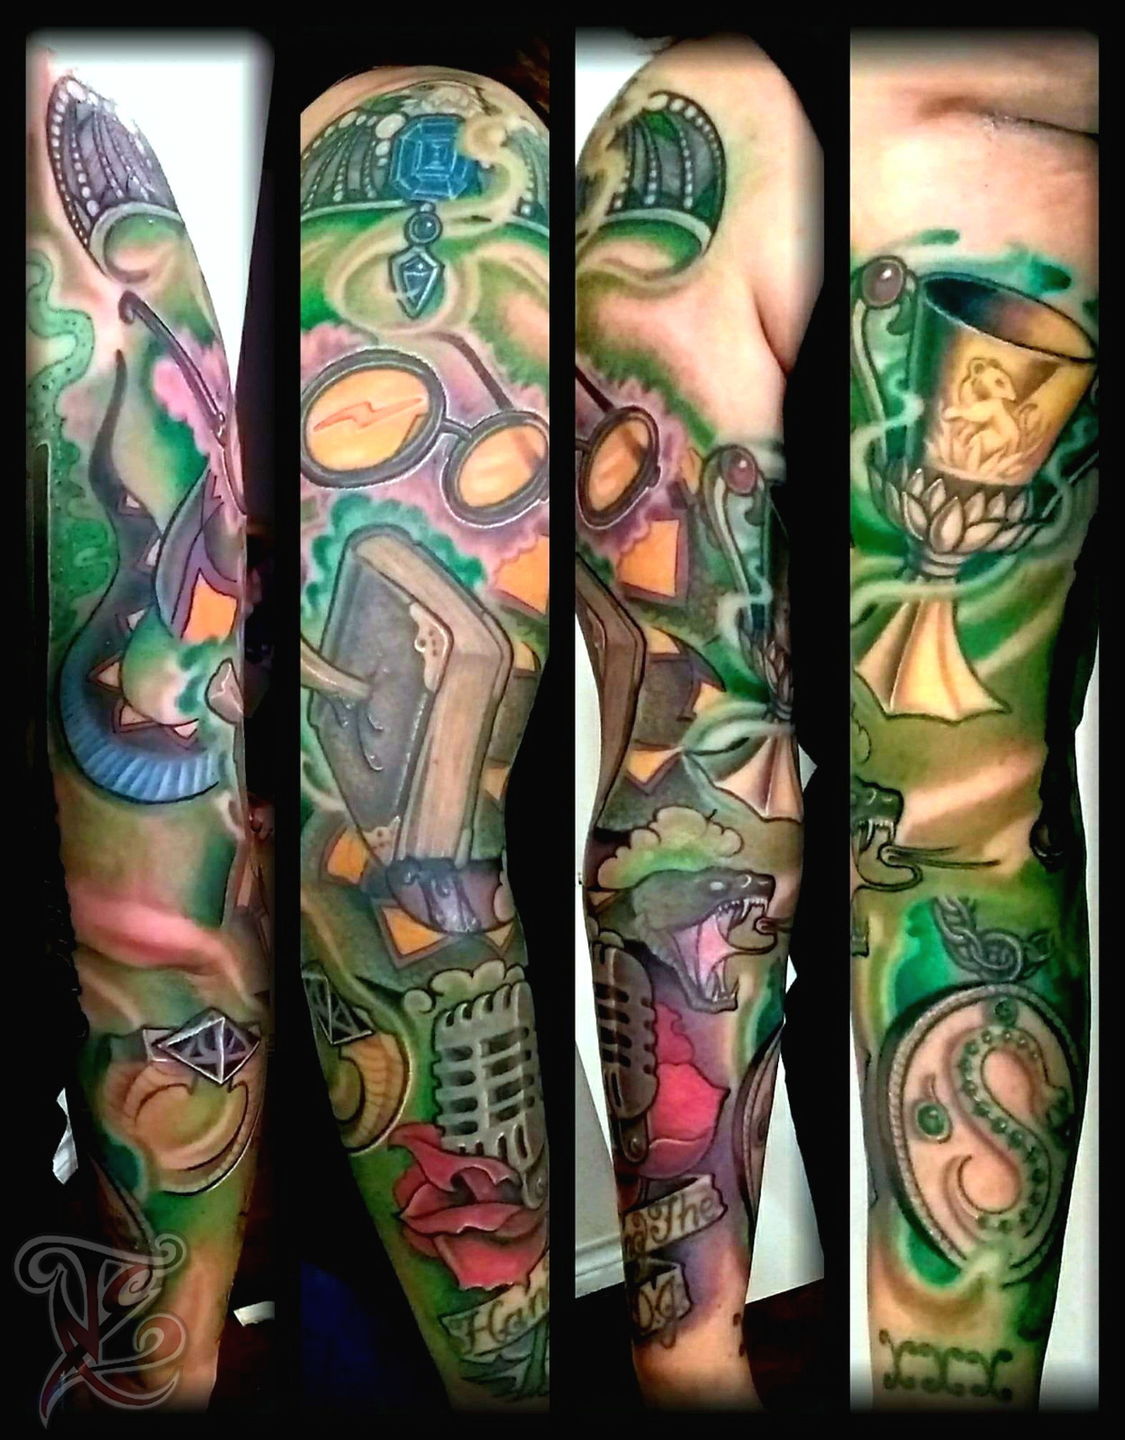 This Harry Potter Tattoo Sleeve May Give You GOOSEBUMPS